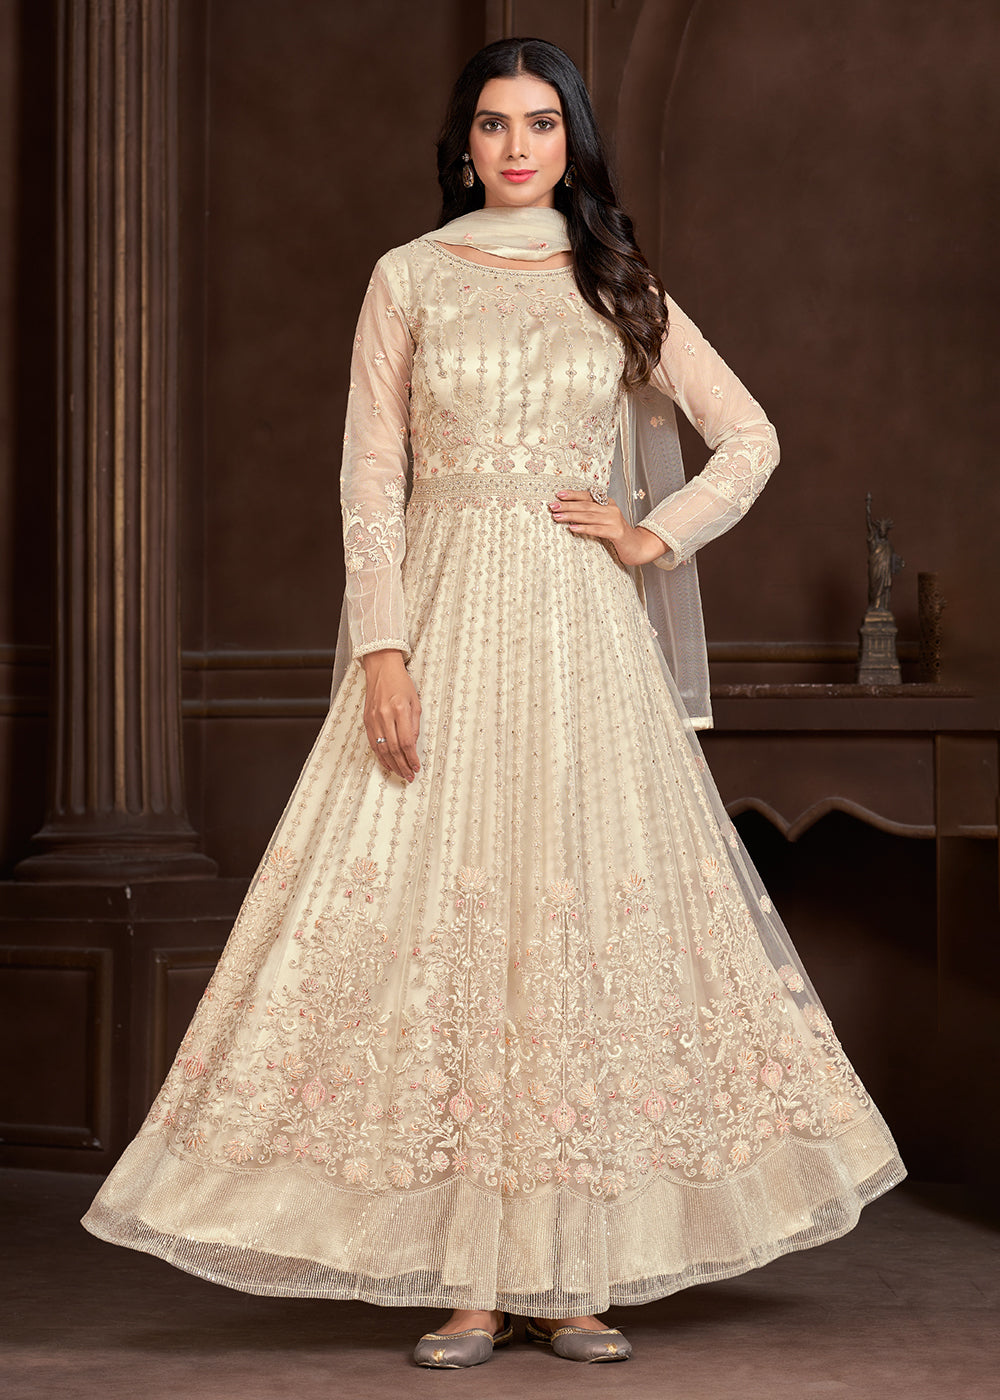 White Anarkali Gown Pant Set With Dupatta, Indian Traditional Solid Color  Gown Dupatta Set For Women And Girls Weddings, Readymade Dresses at Rs  1999.00 | Surat| ID: 2850225091962